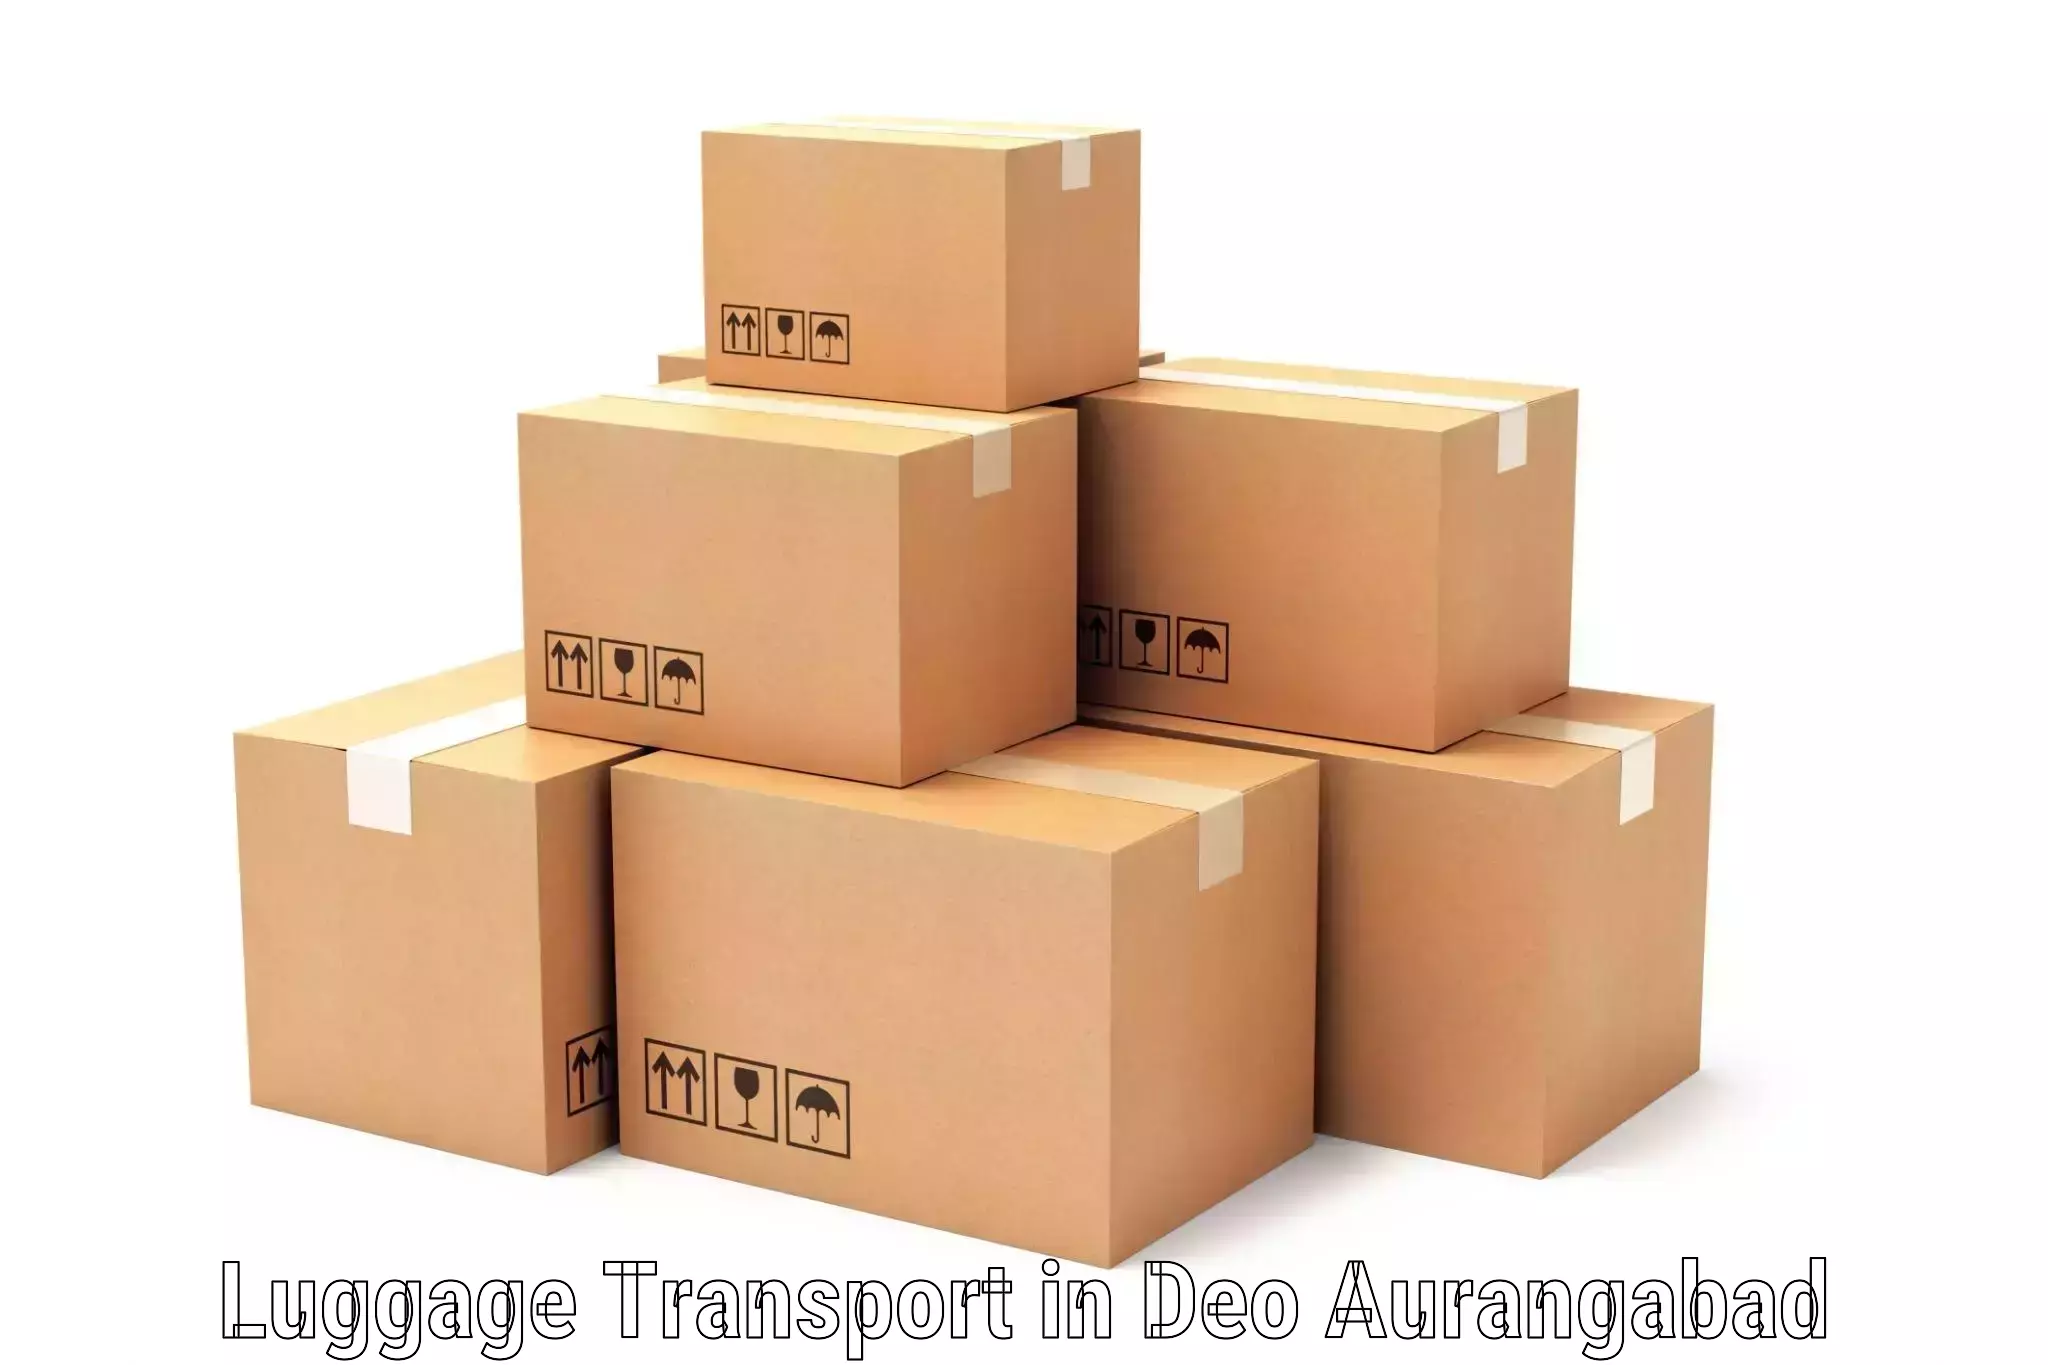 Online luggage shipping in Deo Aurangabad